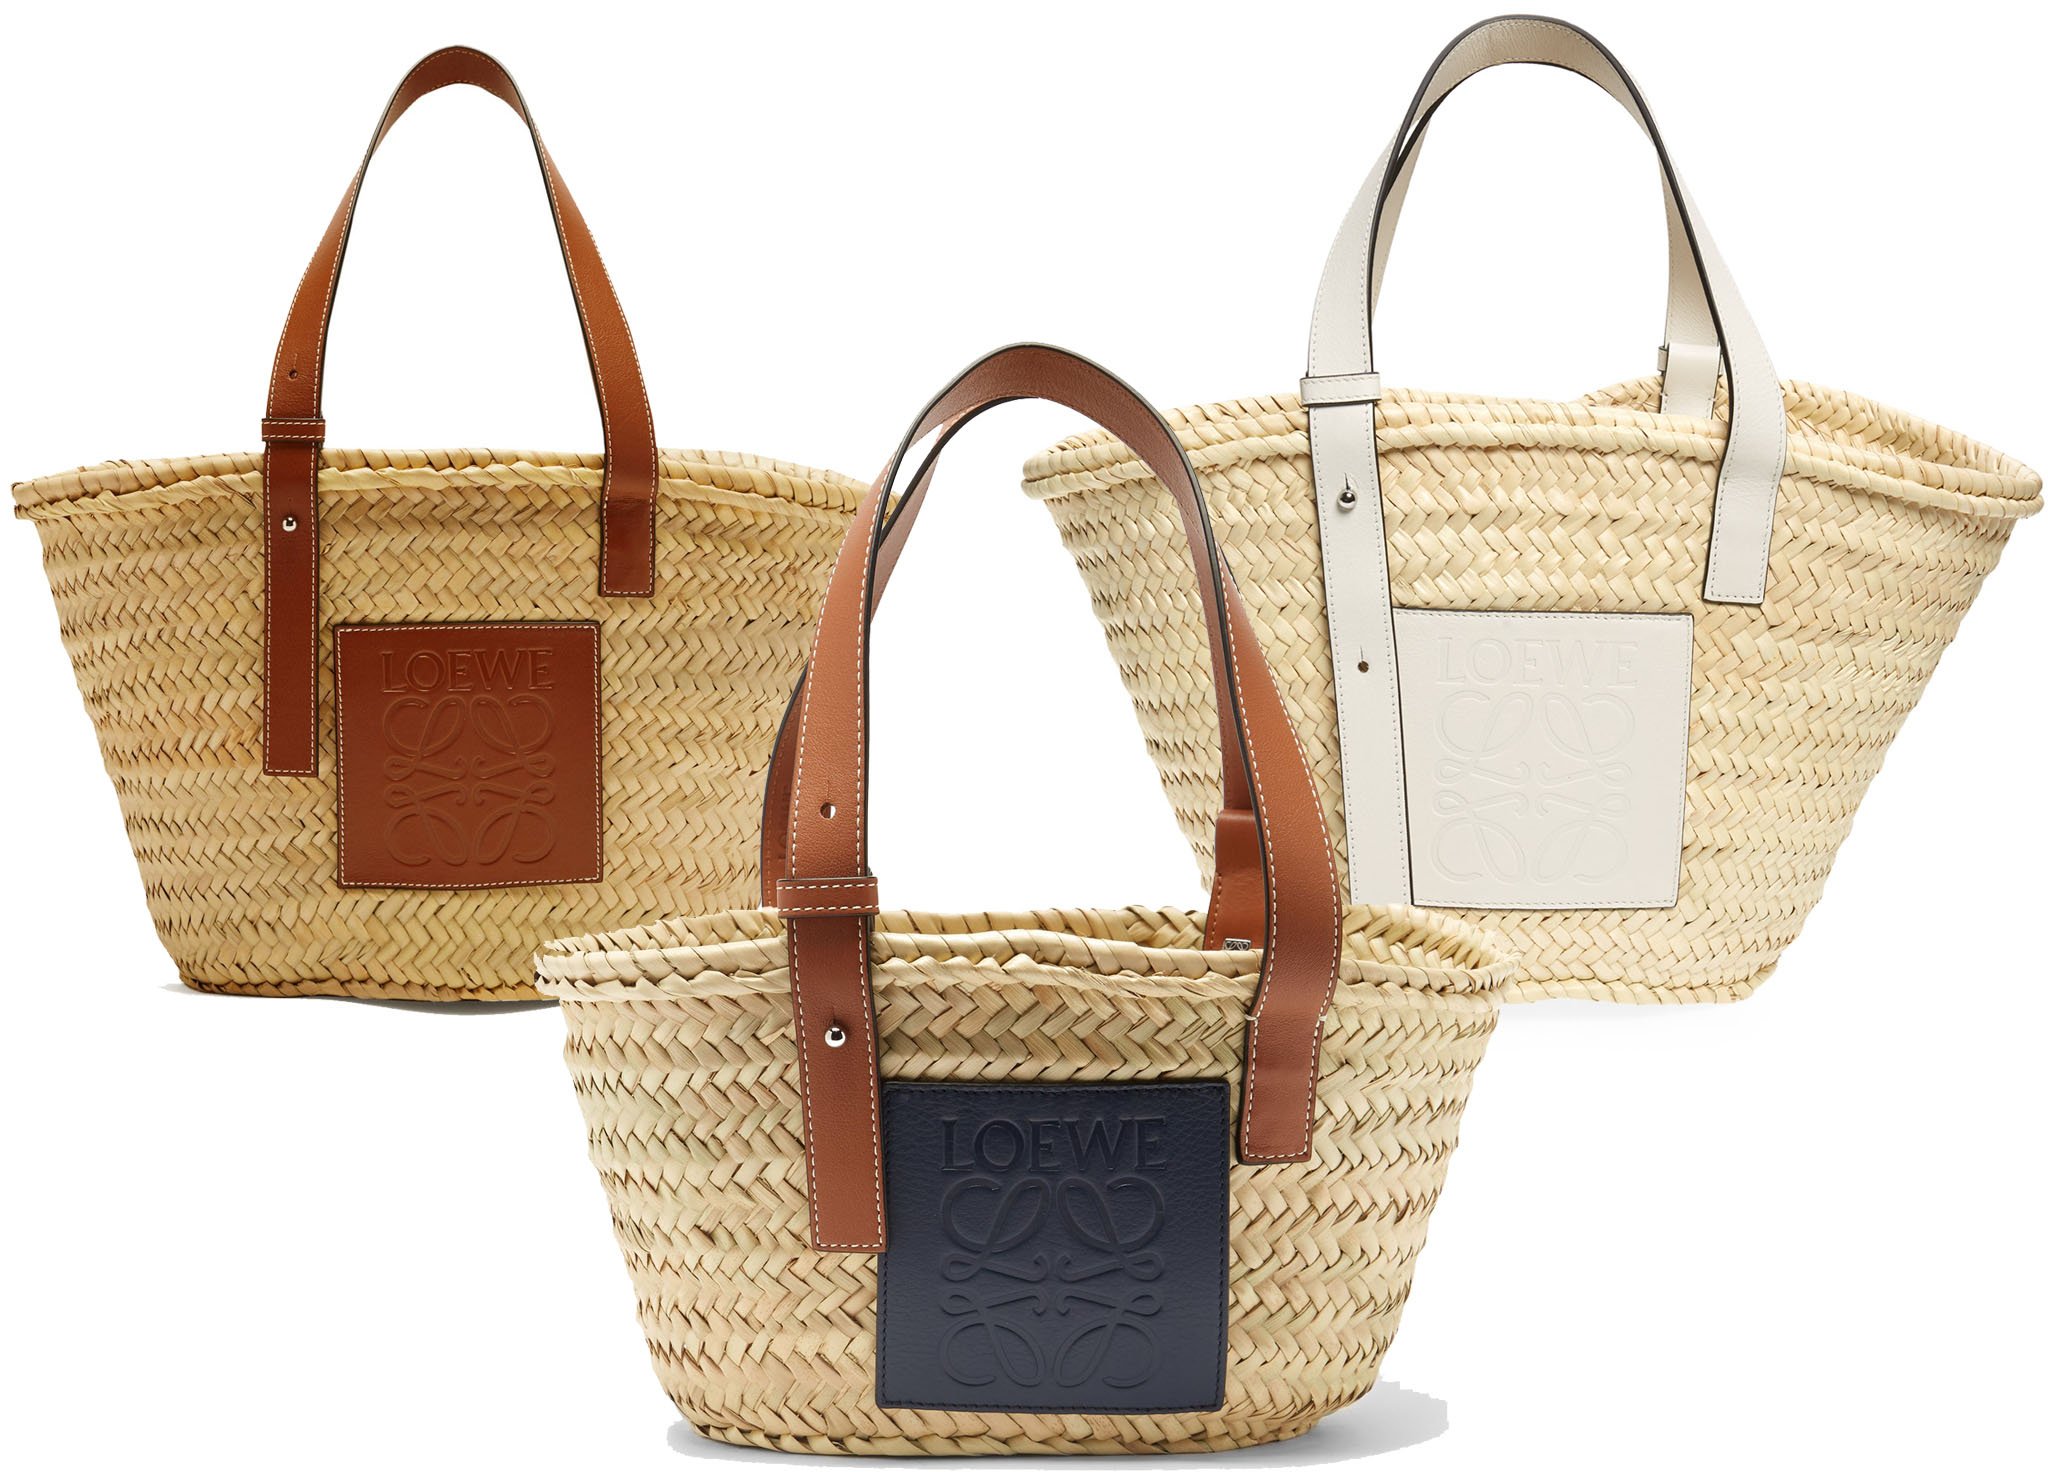 Loewe is known not only for its fine leather goods but also for its basket woven bags